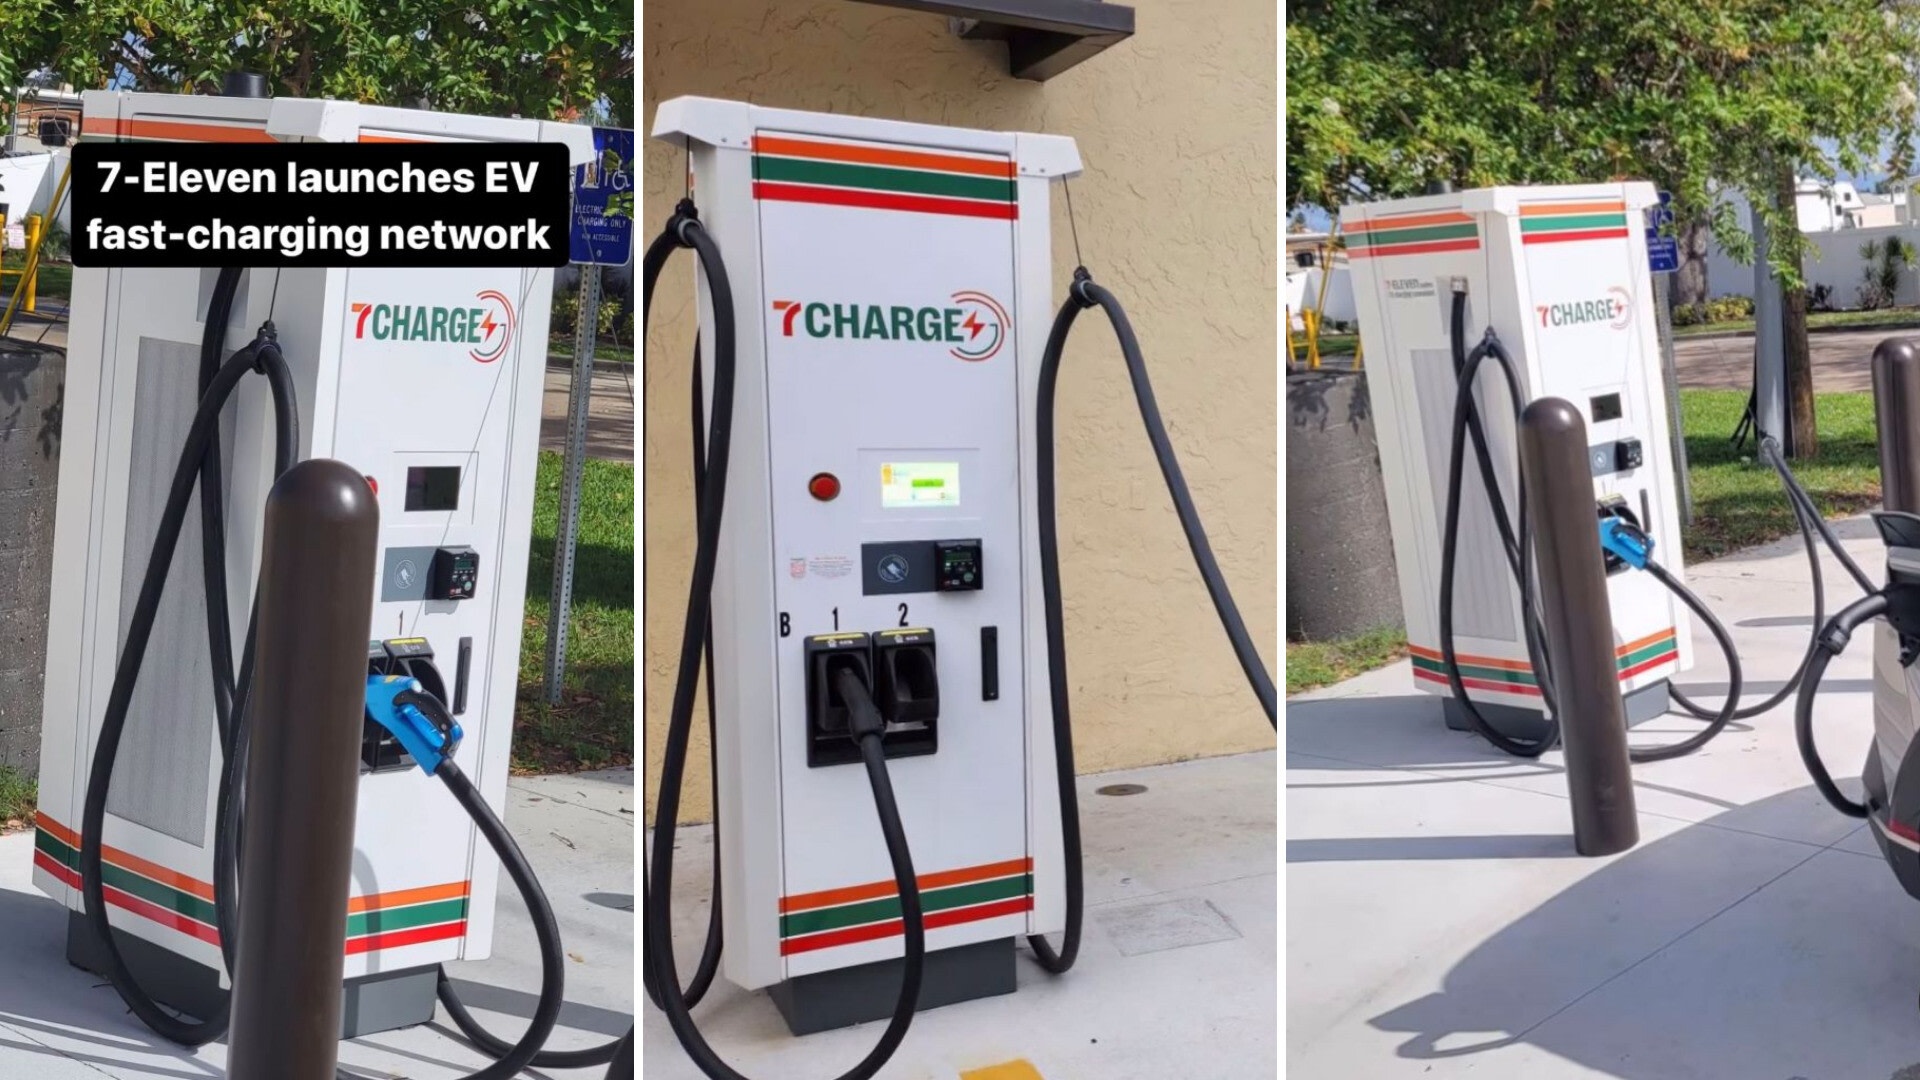 7Eleven is adding an EV fastcharging network to its stores